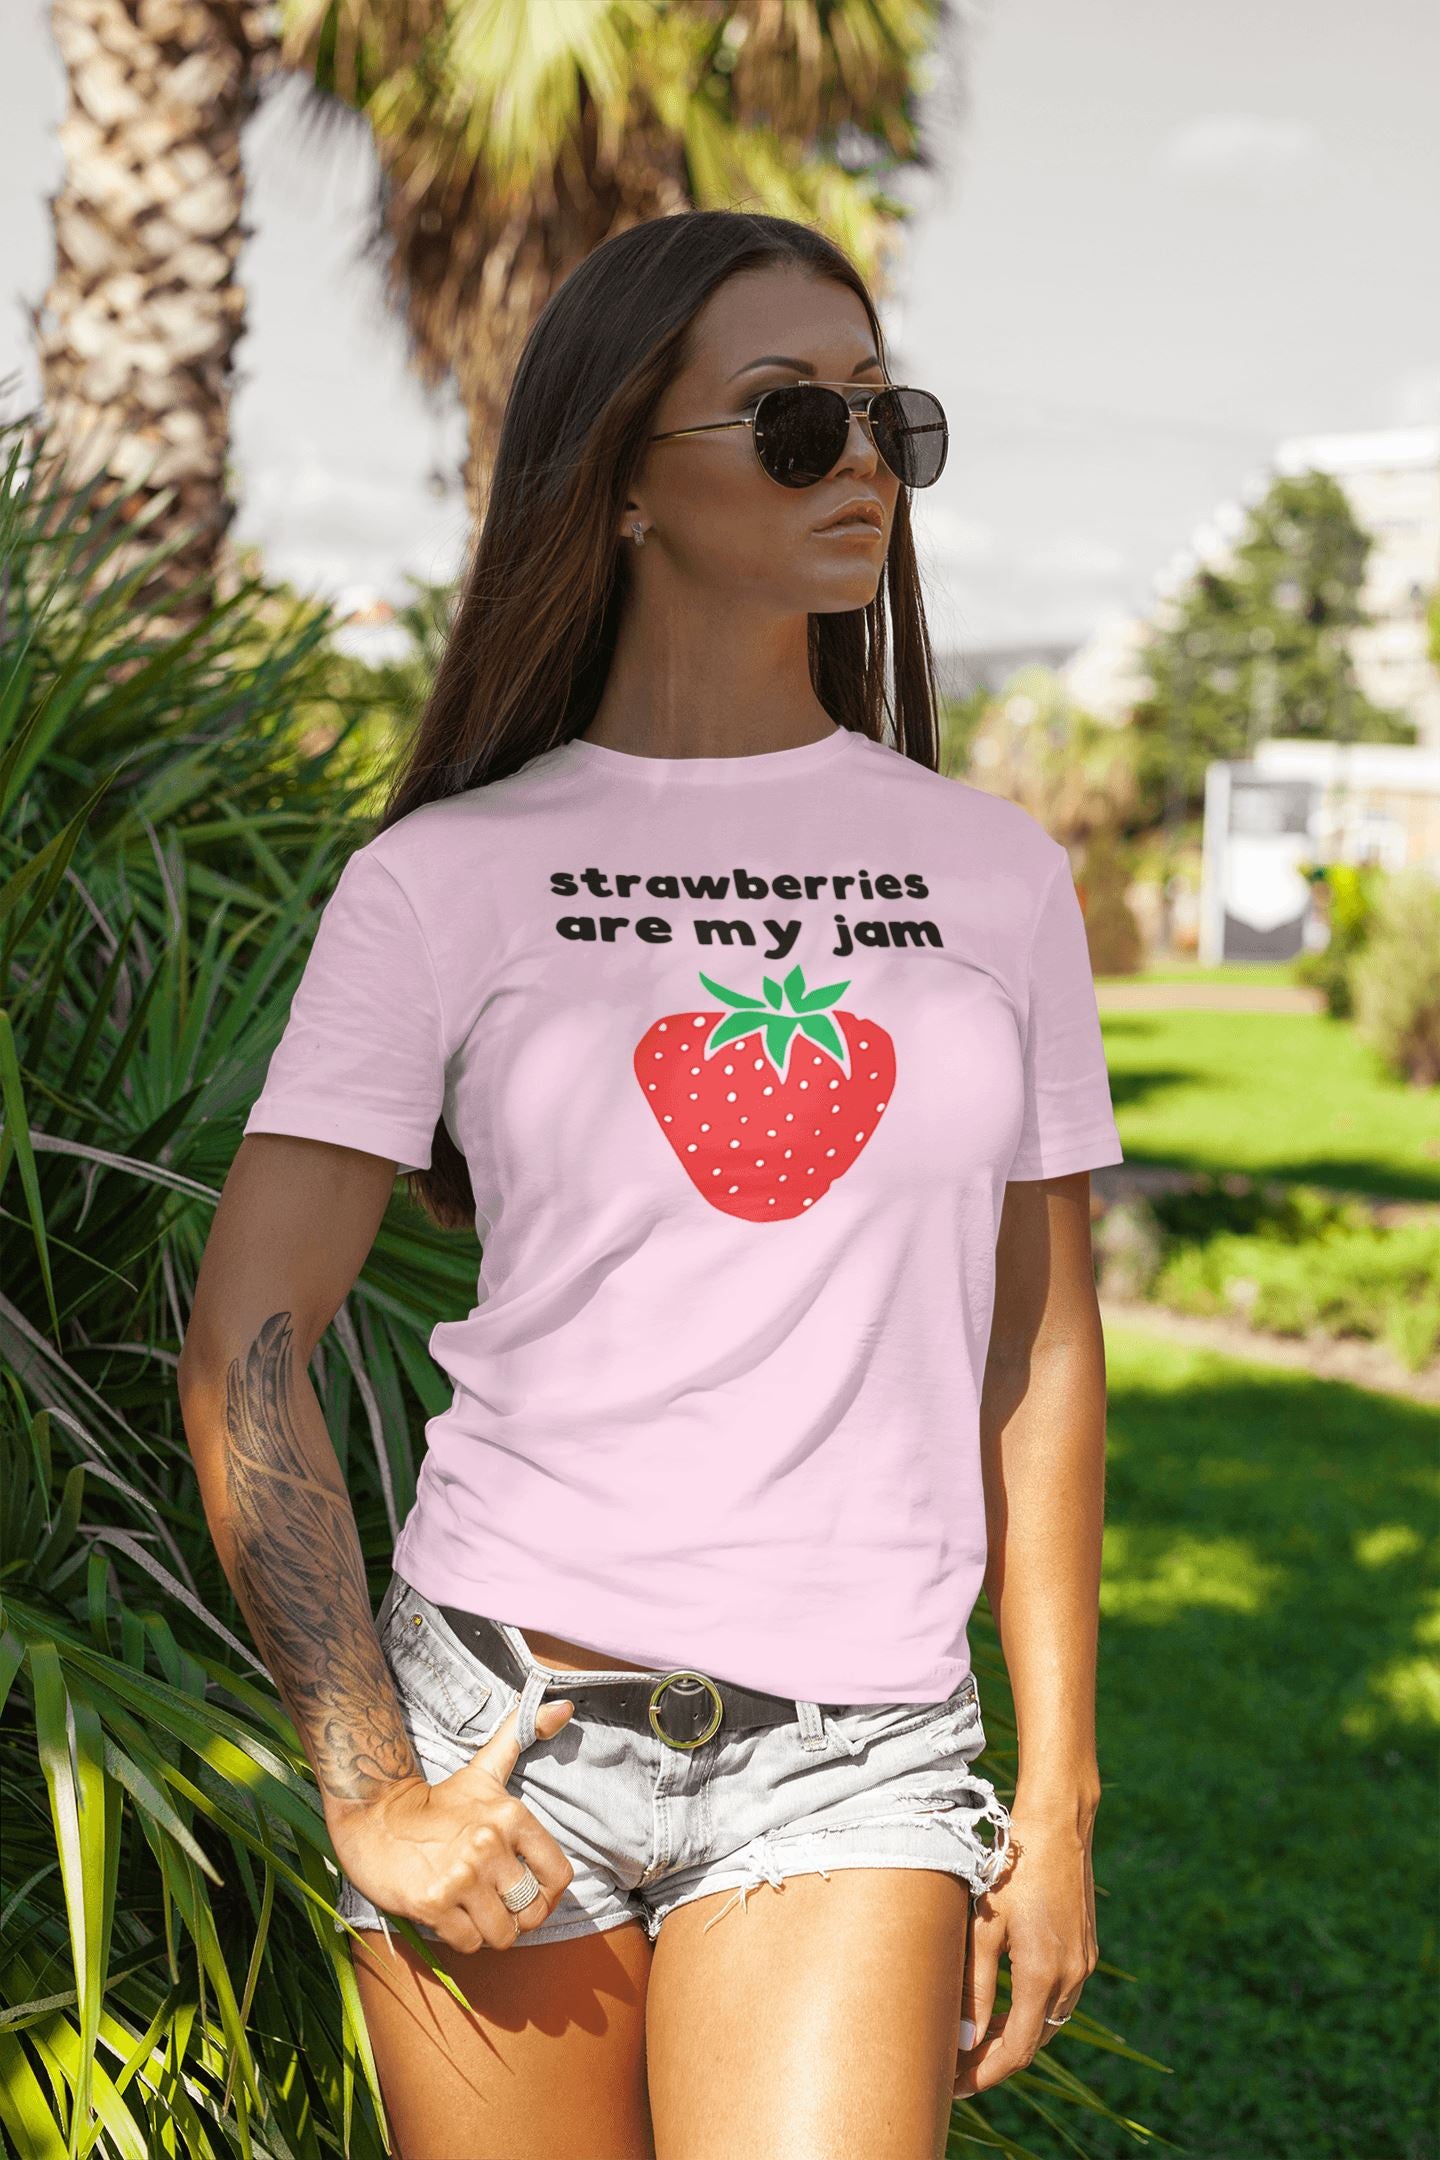 Strawberries Are My Jam Funny Troll T Shirt for Men and Women - Catch My Drift India  clothing, female, funny, general, made in india, pink, shirt, t shirt, trending, tshirt, white